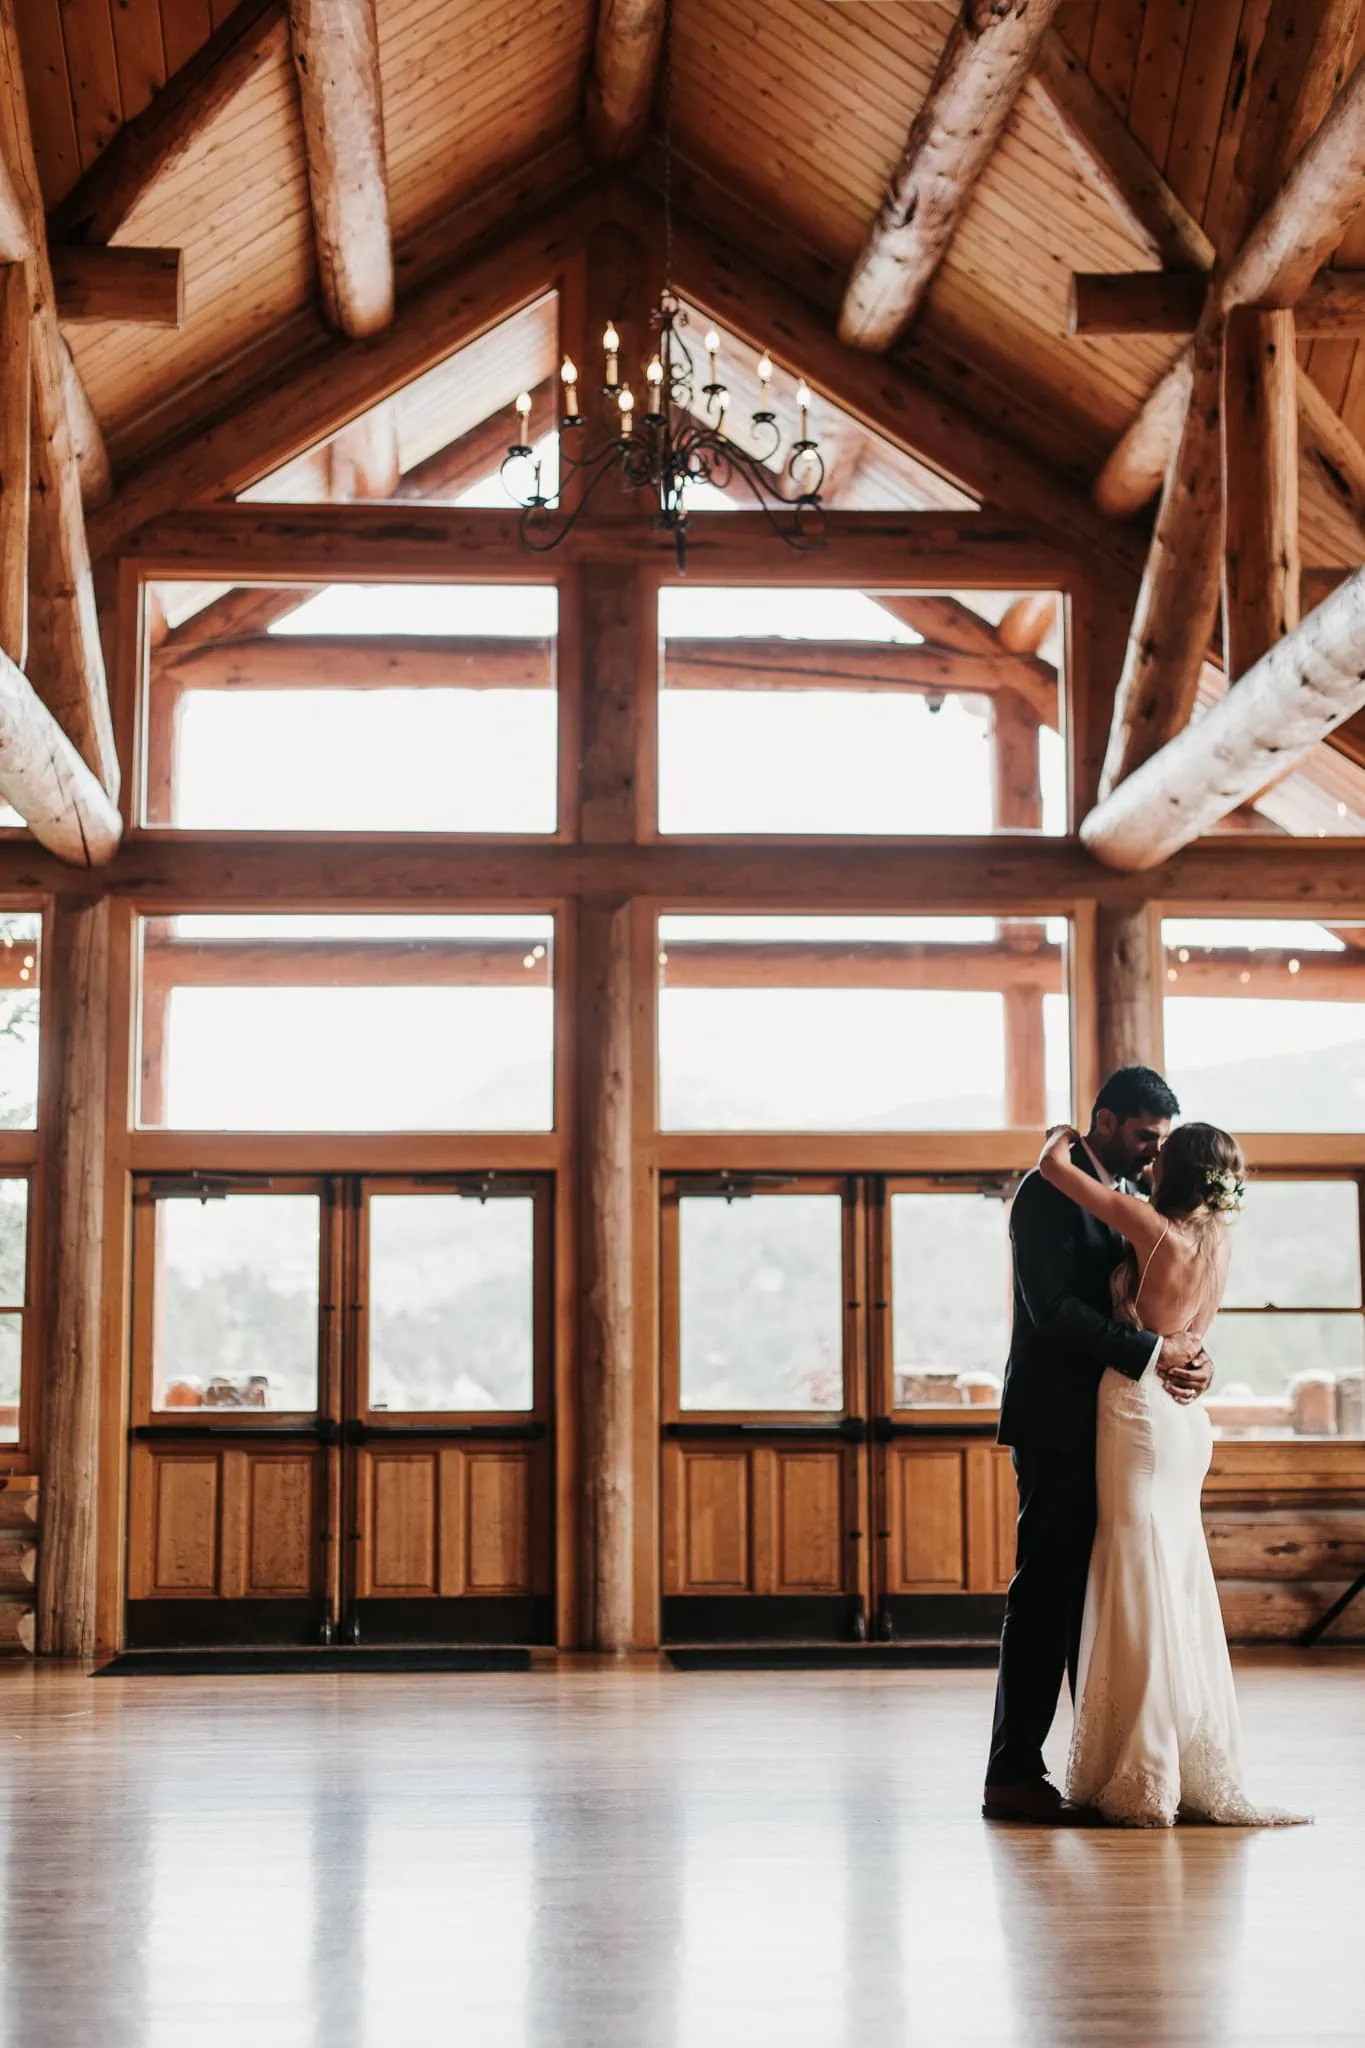 First dance at Evergreen Lake House wedding